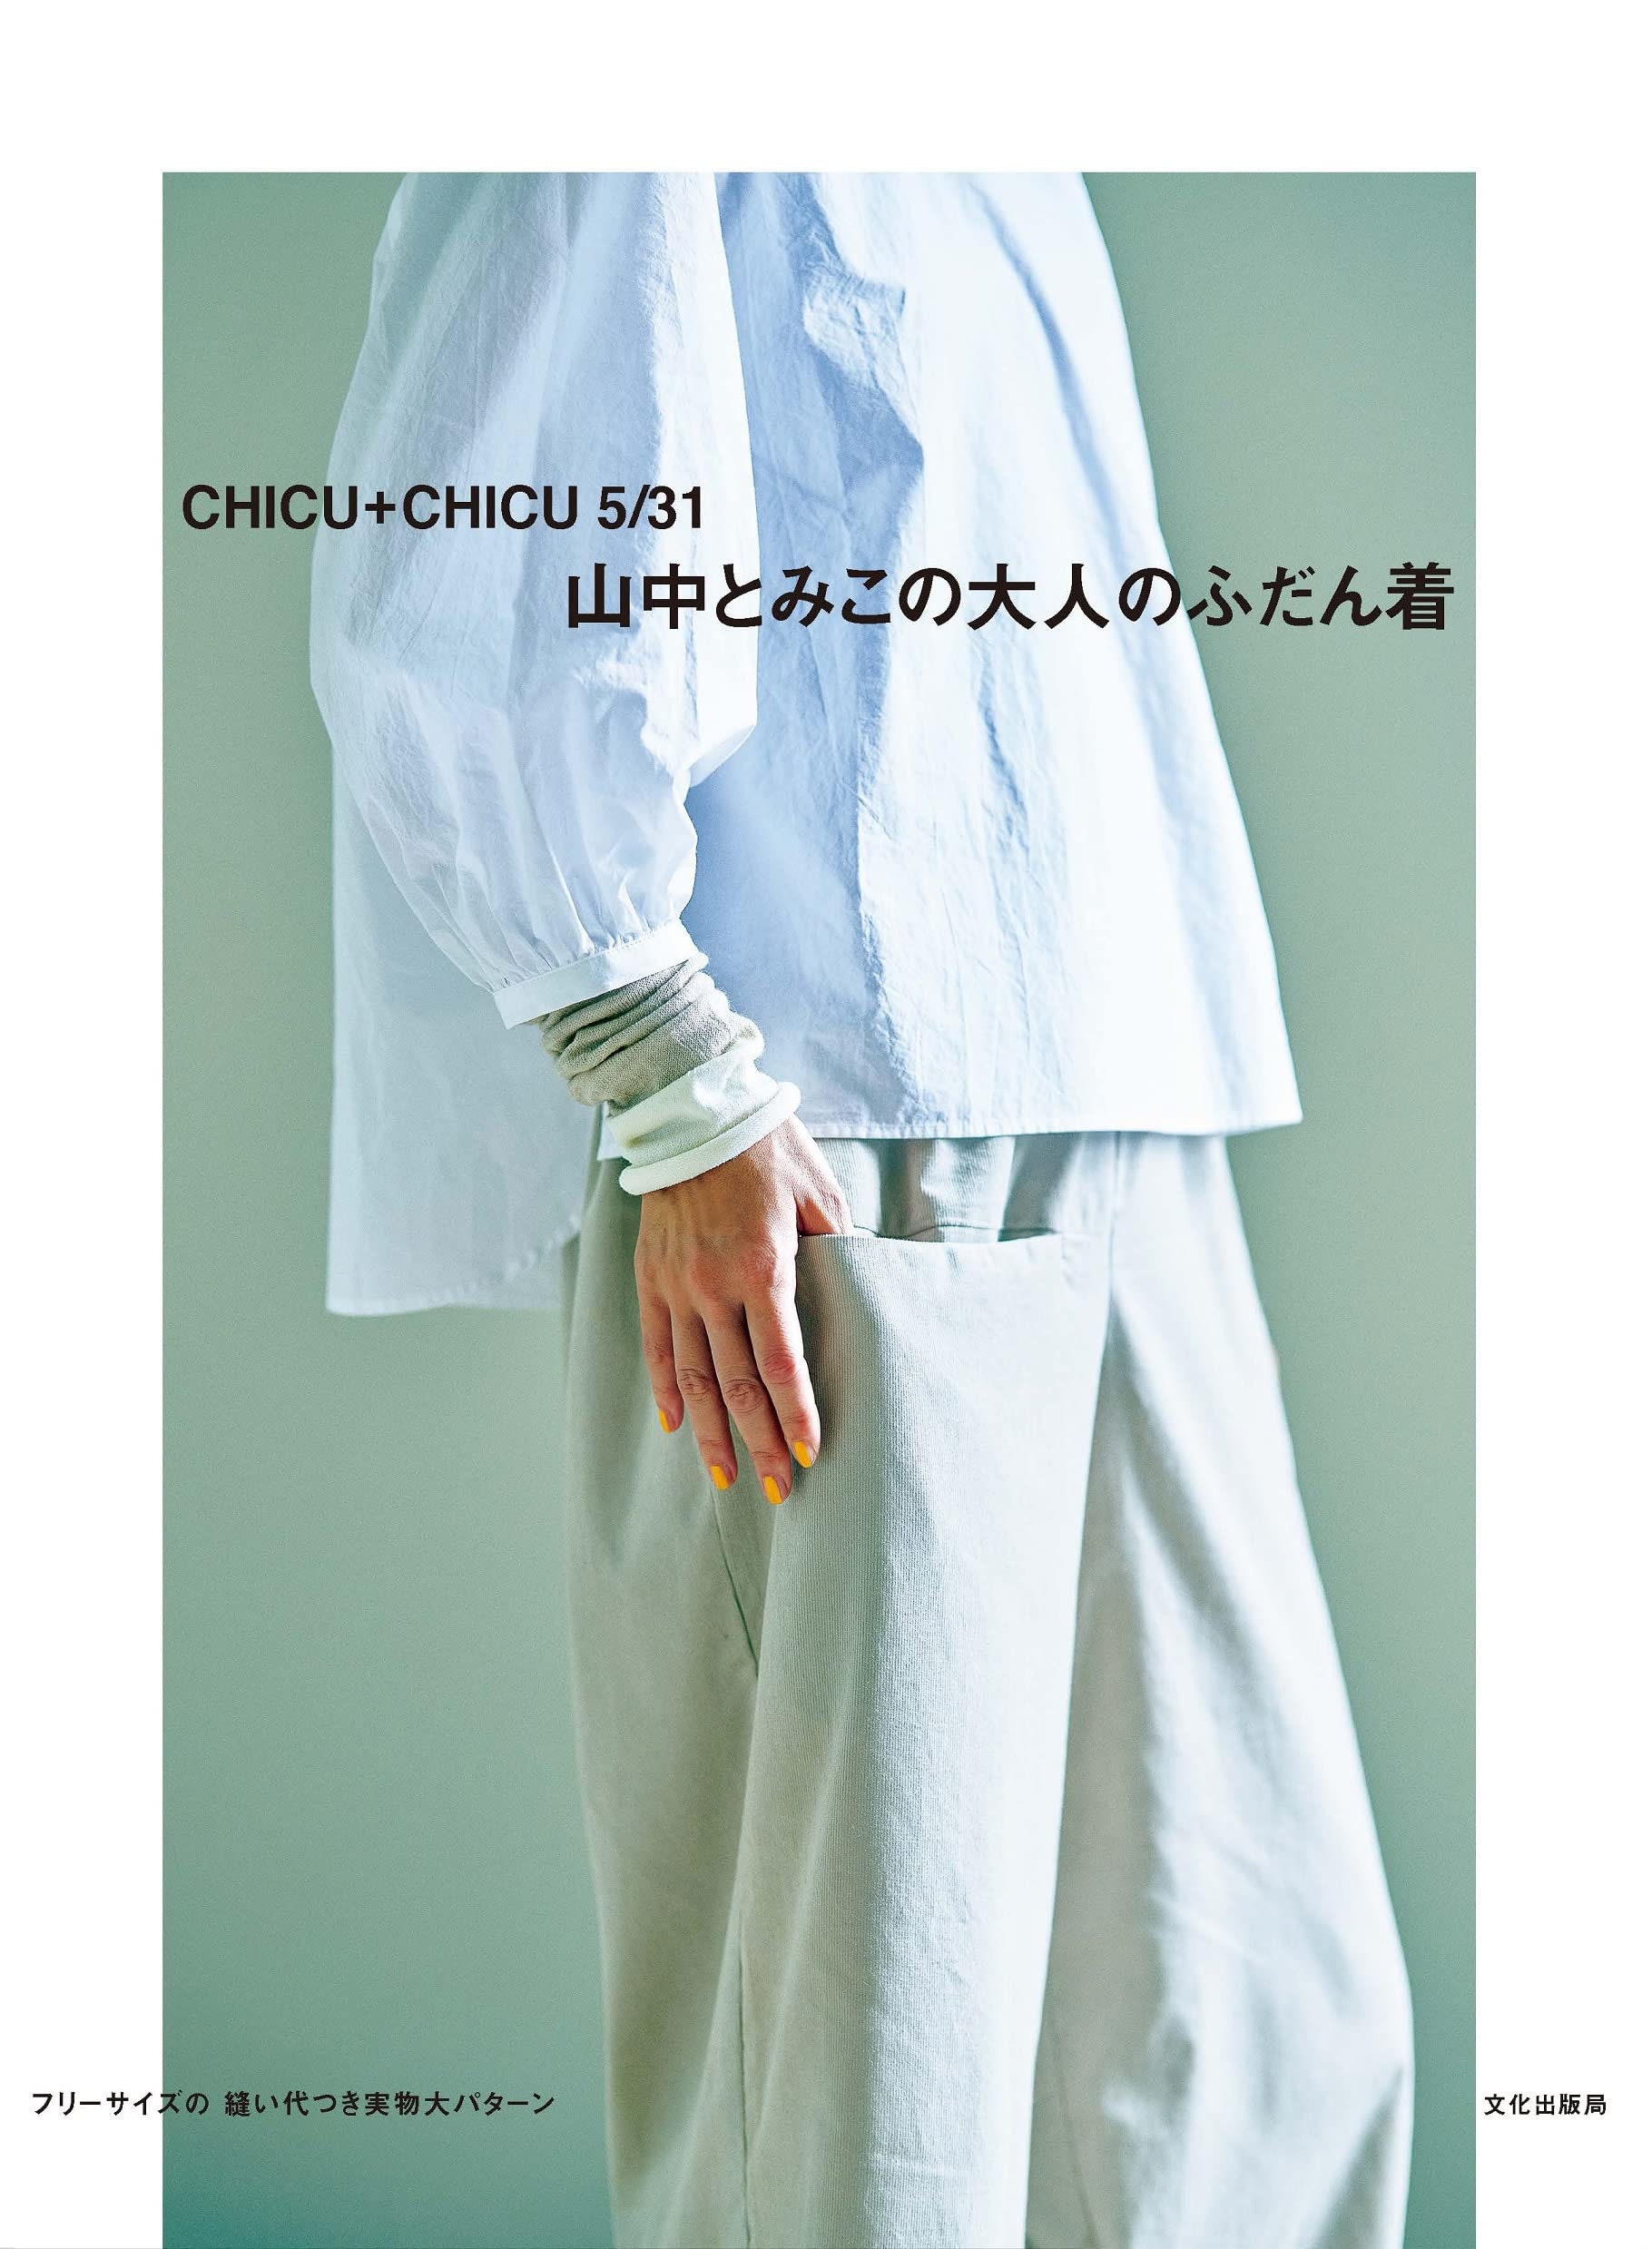 CHICUCHICU 5/31 Everyday Clothes for Adults Japanese Dress - Etsy 日本